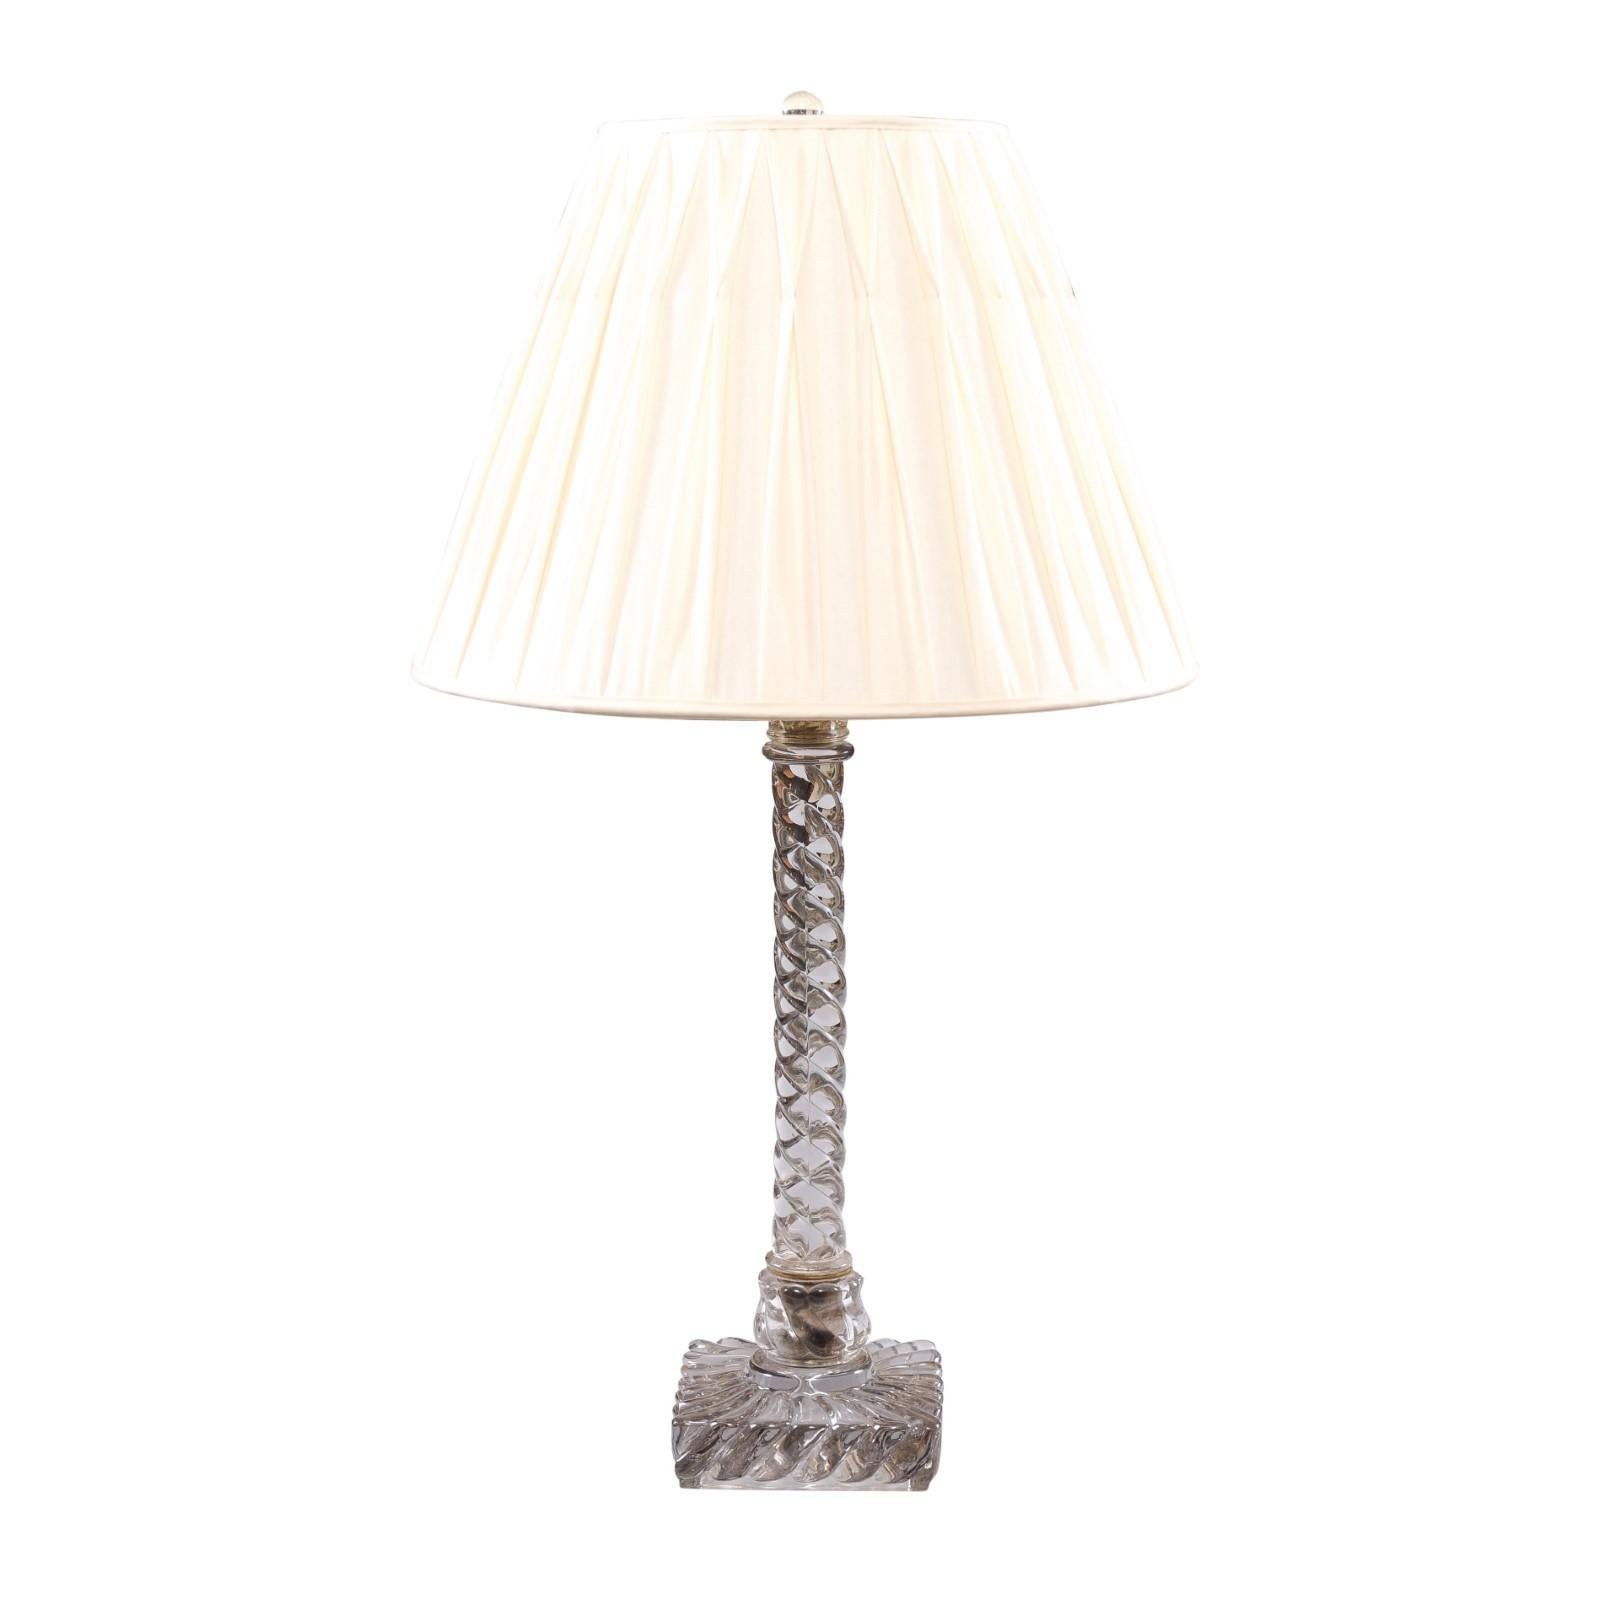 French Baccarat Crystal Twisted Column Lamp, circa 1900